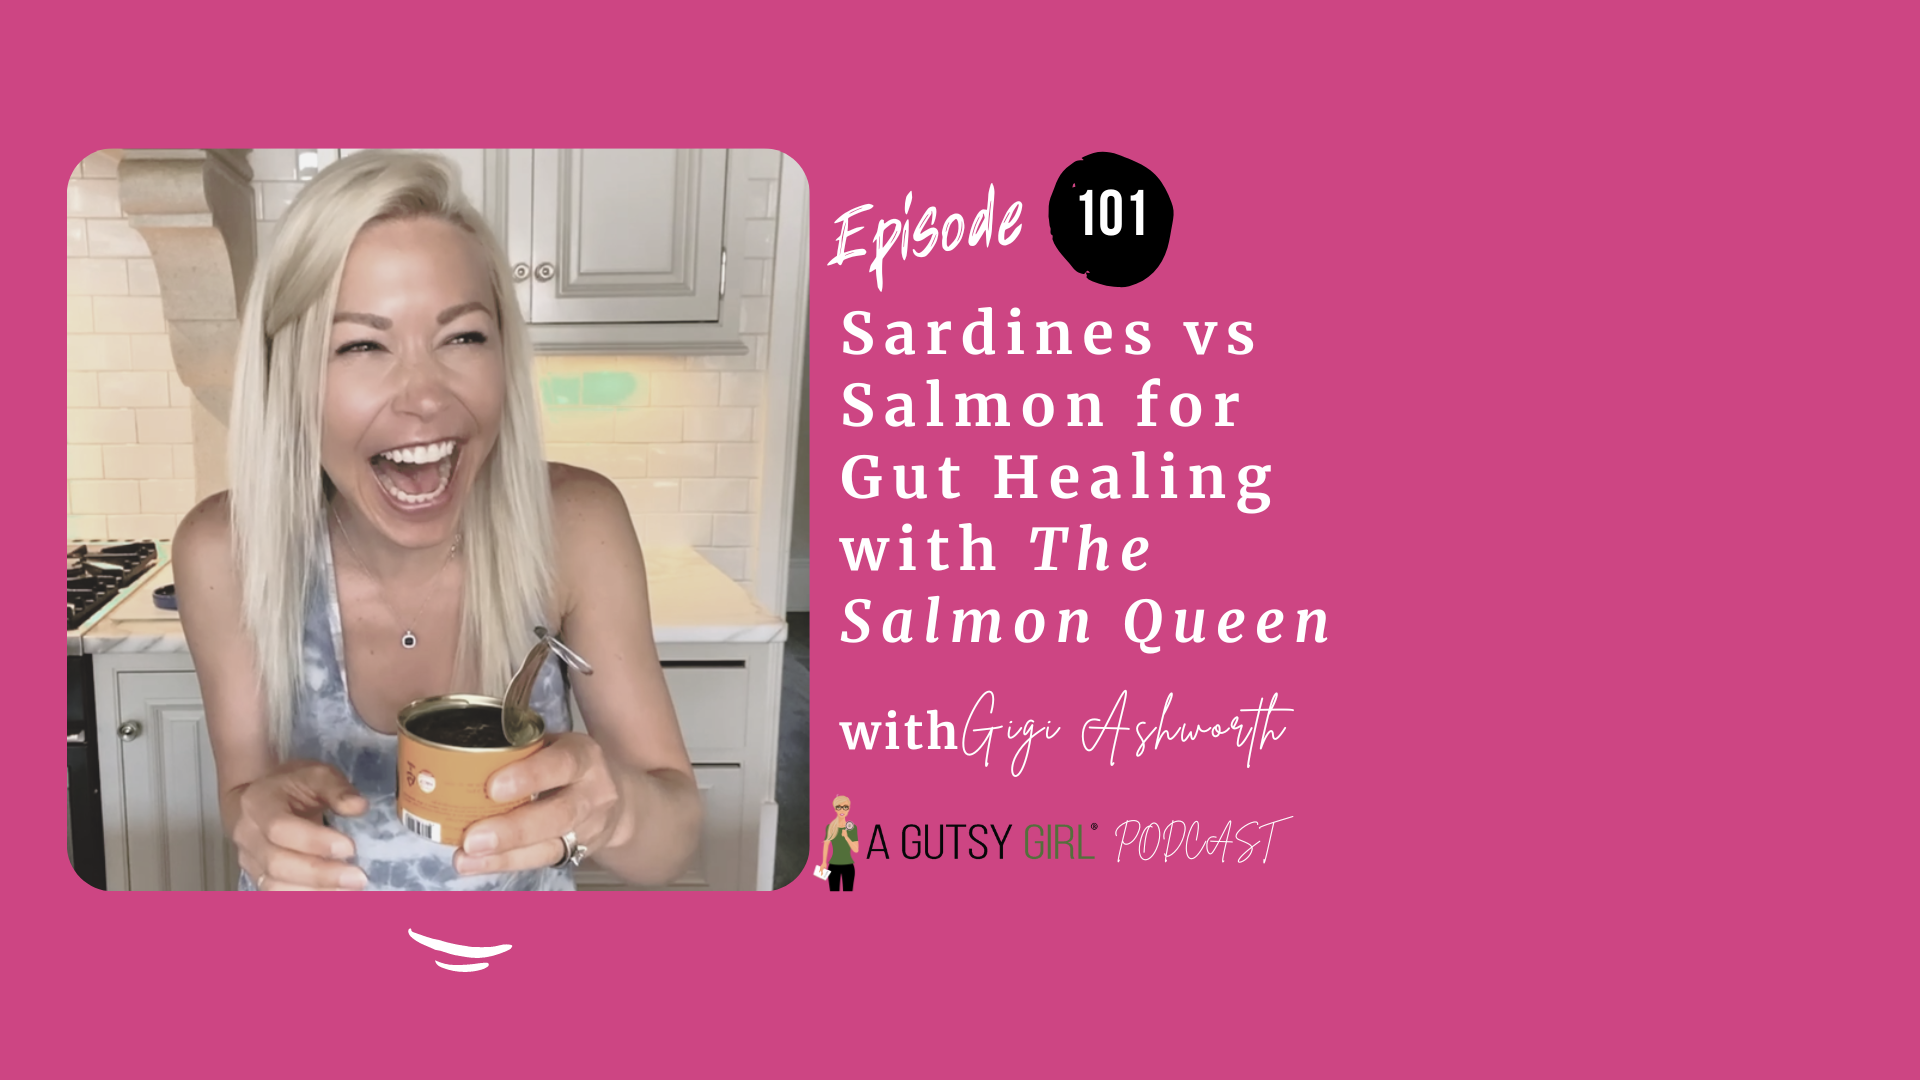 Sardines vs Salmon for Gut Healing with The Salmon Queen Gigi (Episode 101)